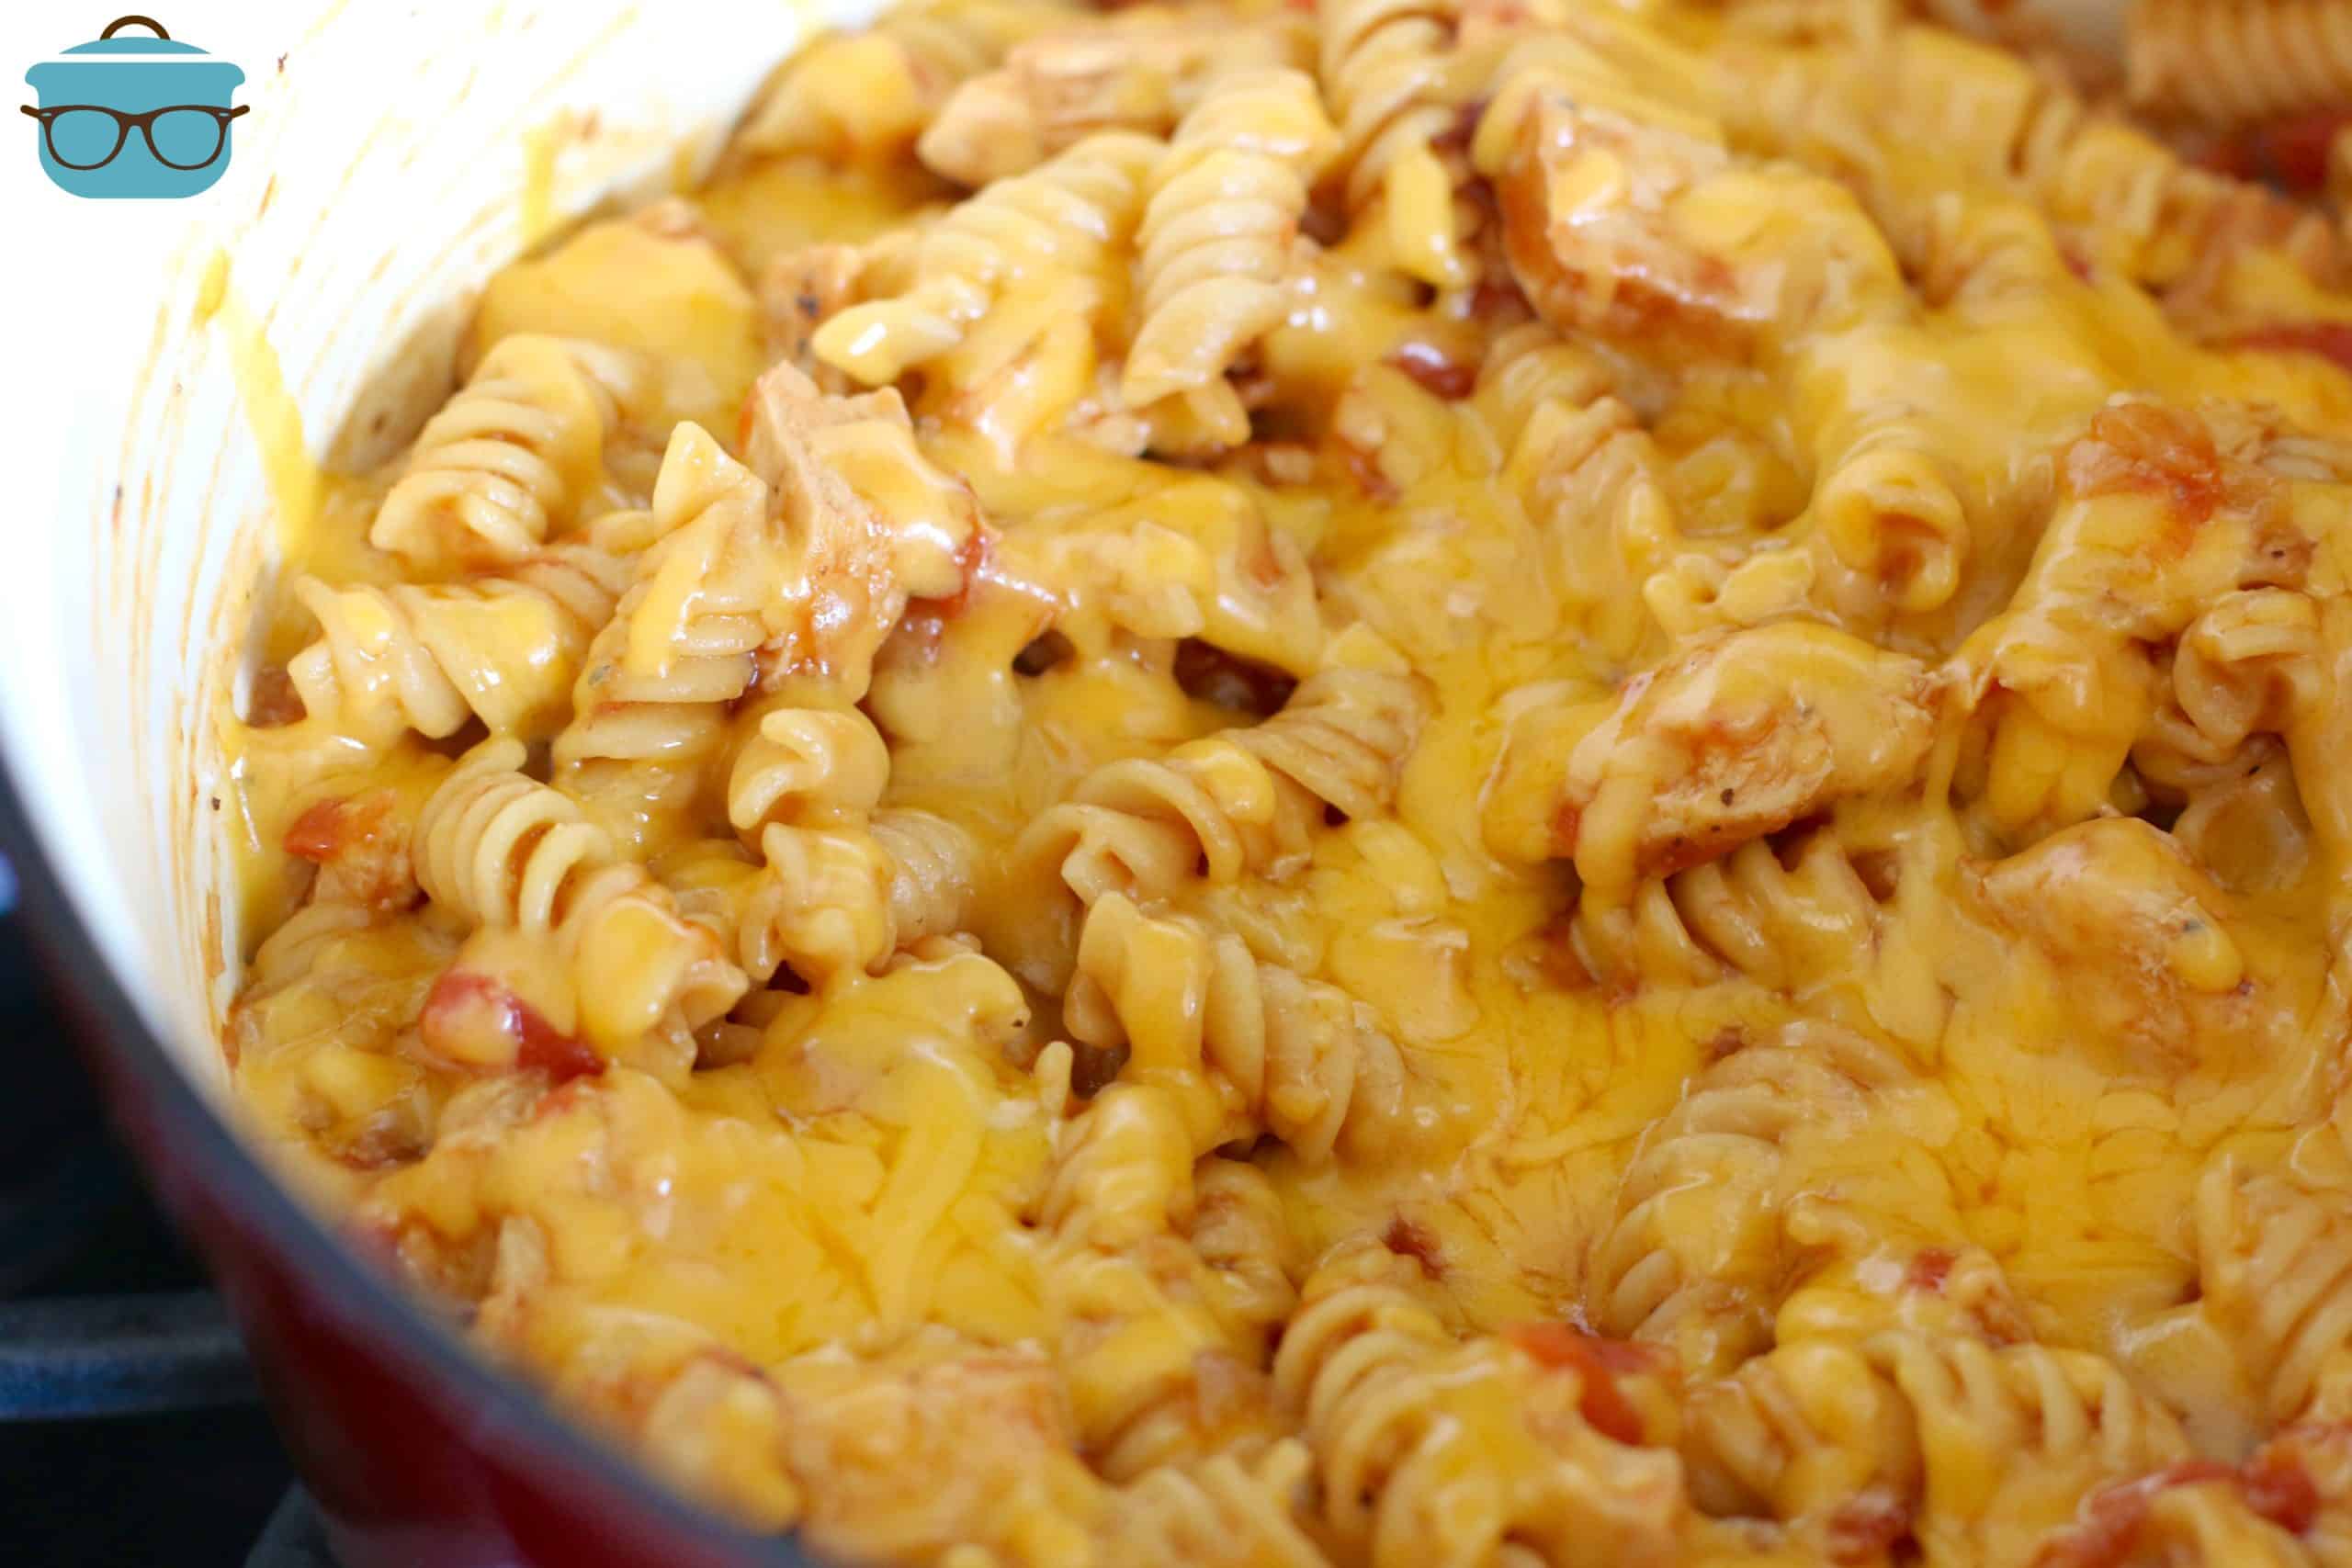 melted cheese on top of bbq chicken pasta.